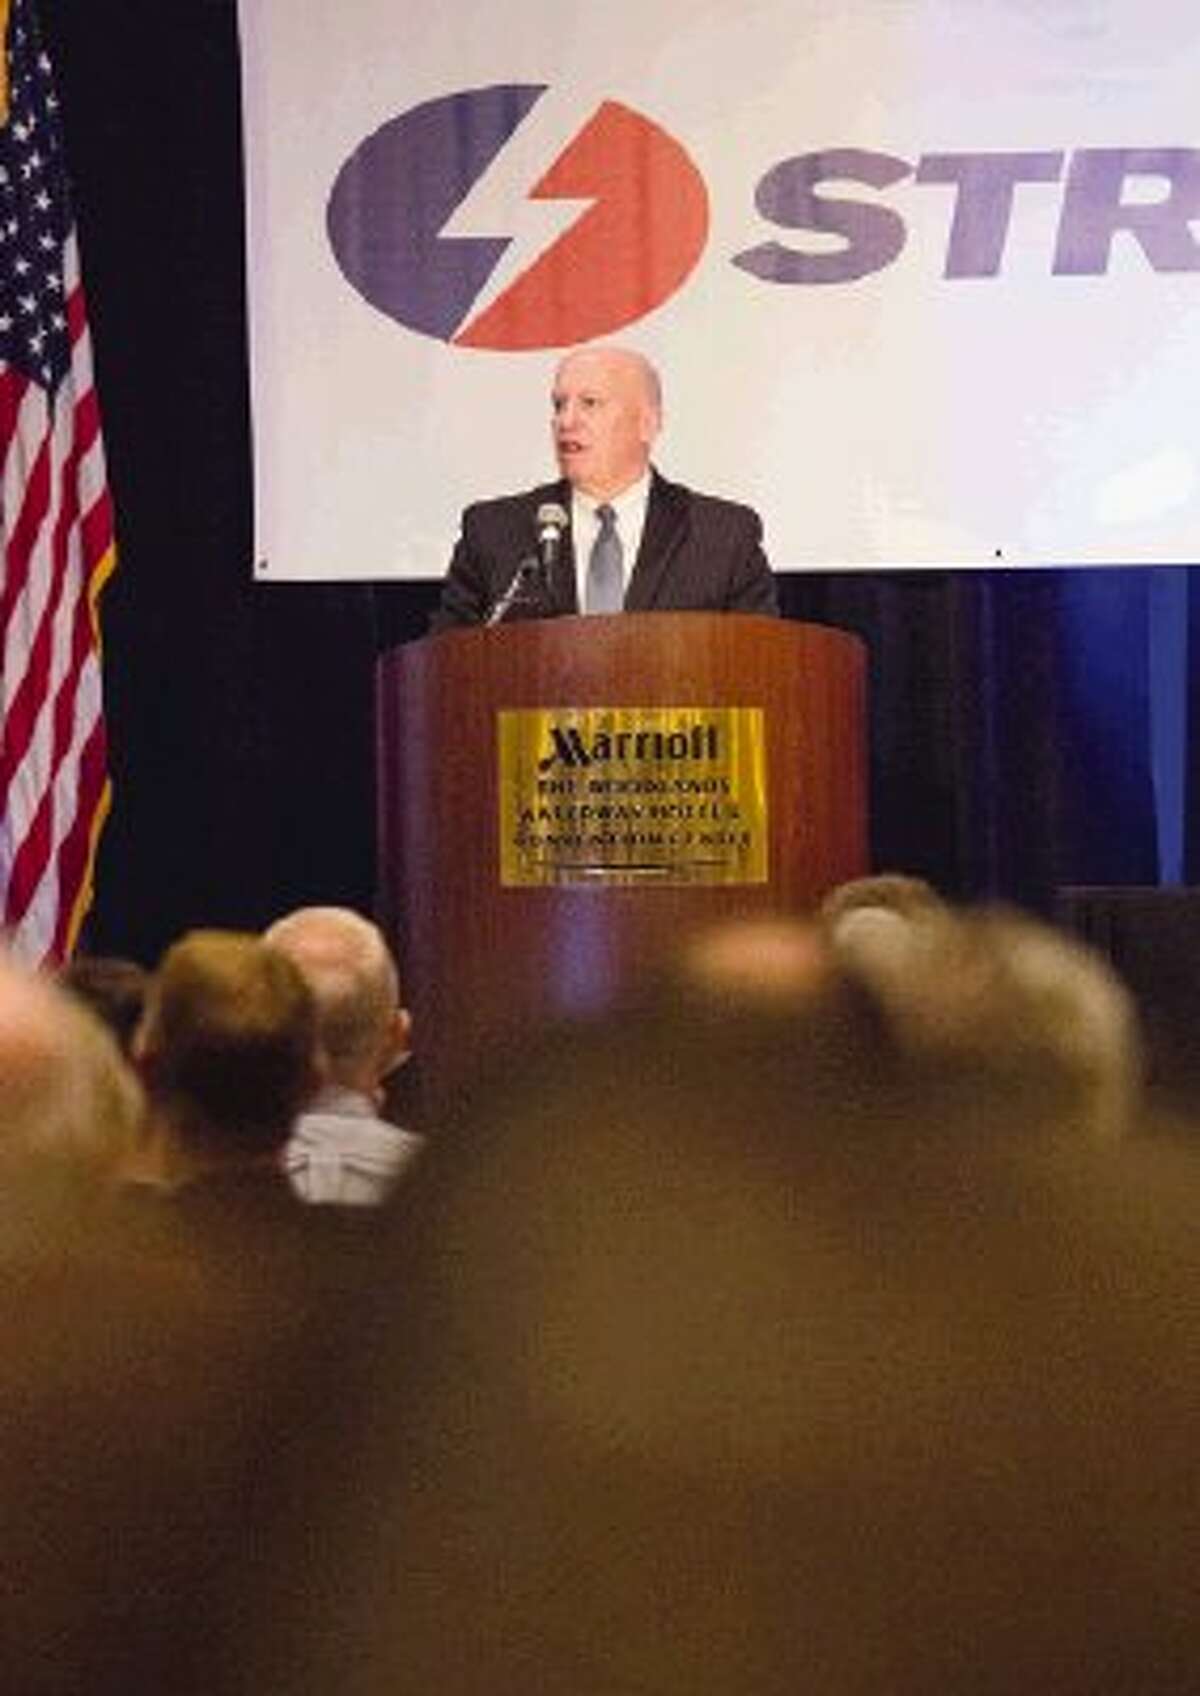 U.S. Representative (R-The Woodlands) Kevin Brady kicks off The Woodlands Area Chamber of Commerce’s 28th Annual Economic Outlook Conference themed for 2014, “Energy to Grow” on Friday during The Woodlands Waterway Marriott Hotel & Convention Center. The conference was presented by Strike energy services provider as depicted on the banner behind Congressman Brady.